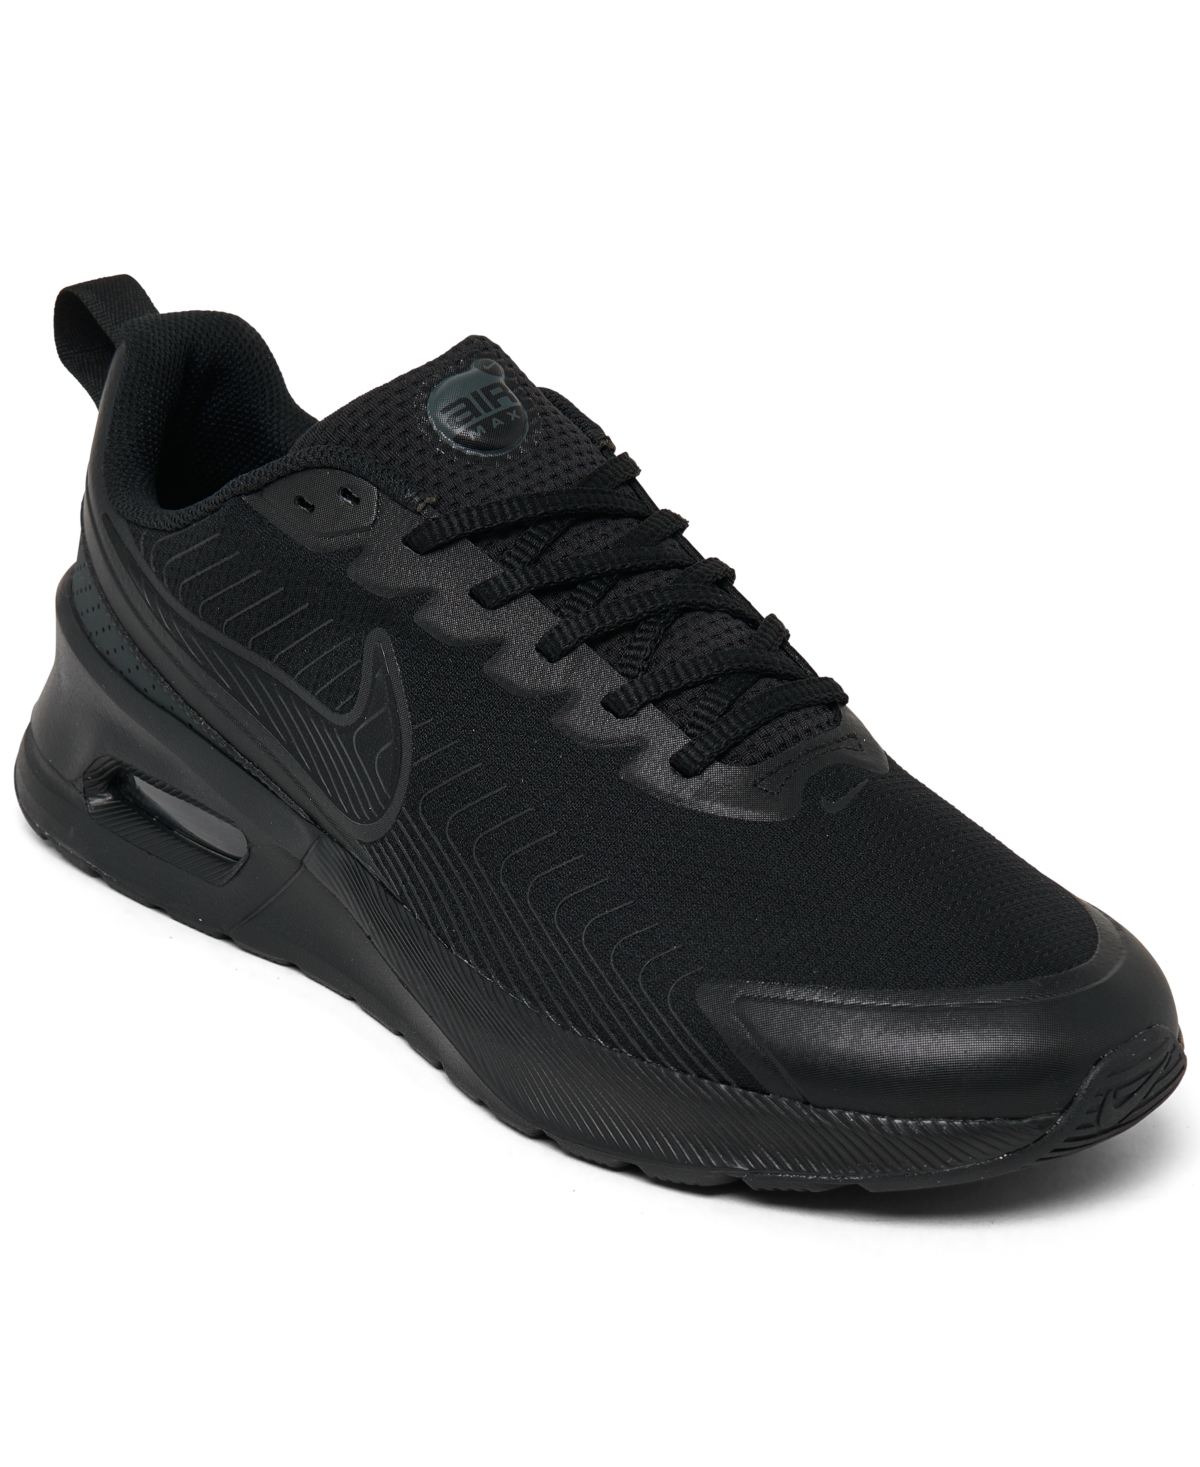 Men's Casual Sneakers from Finish Line - Black